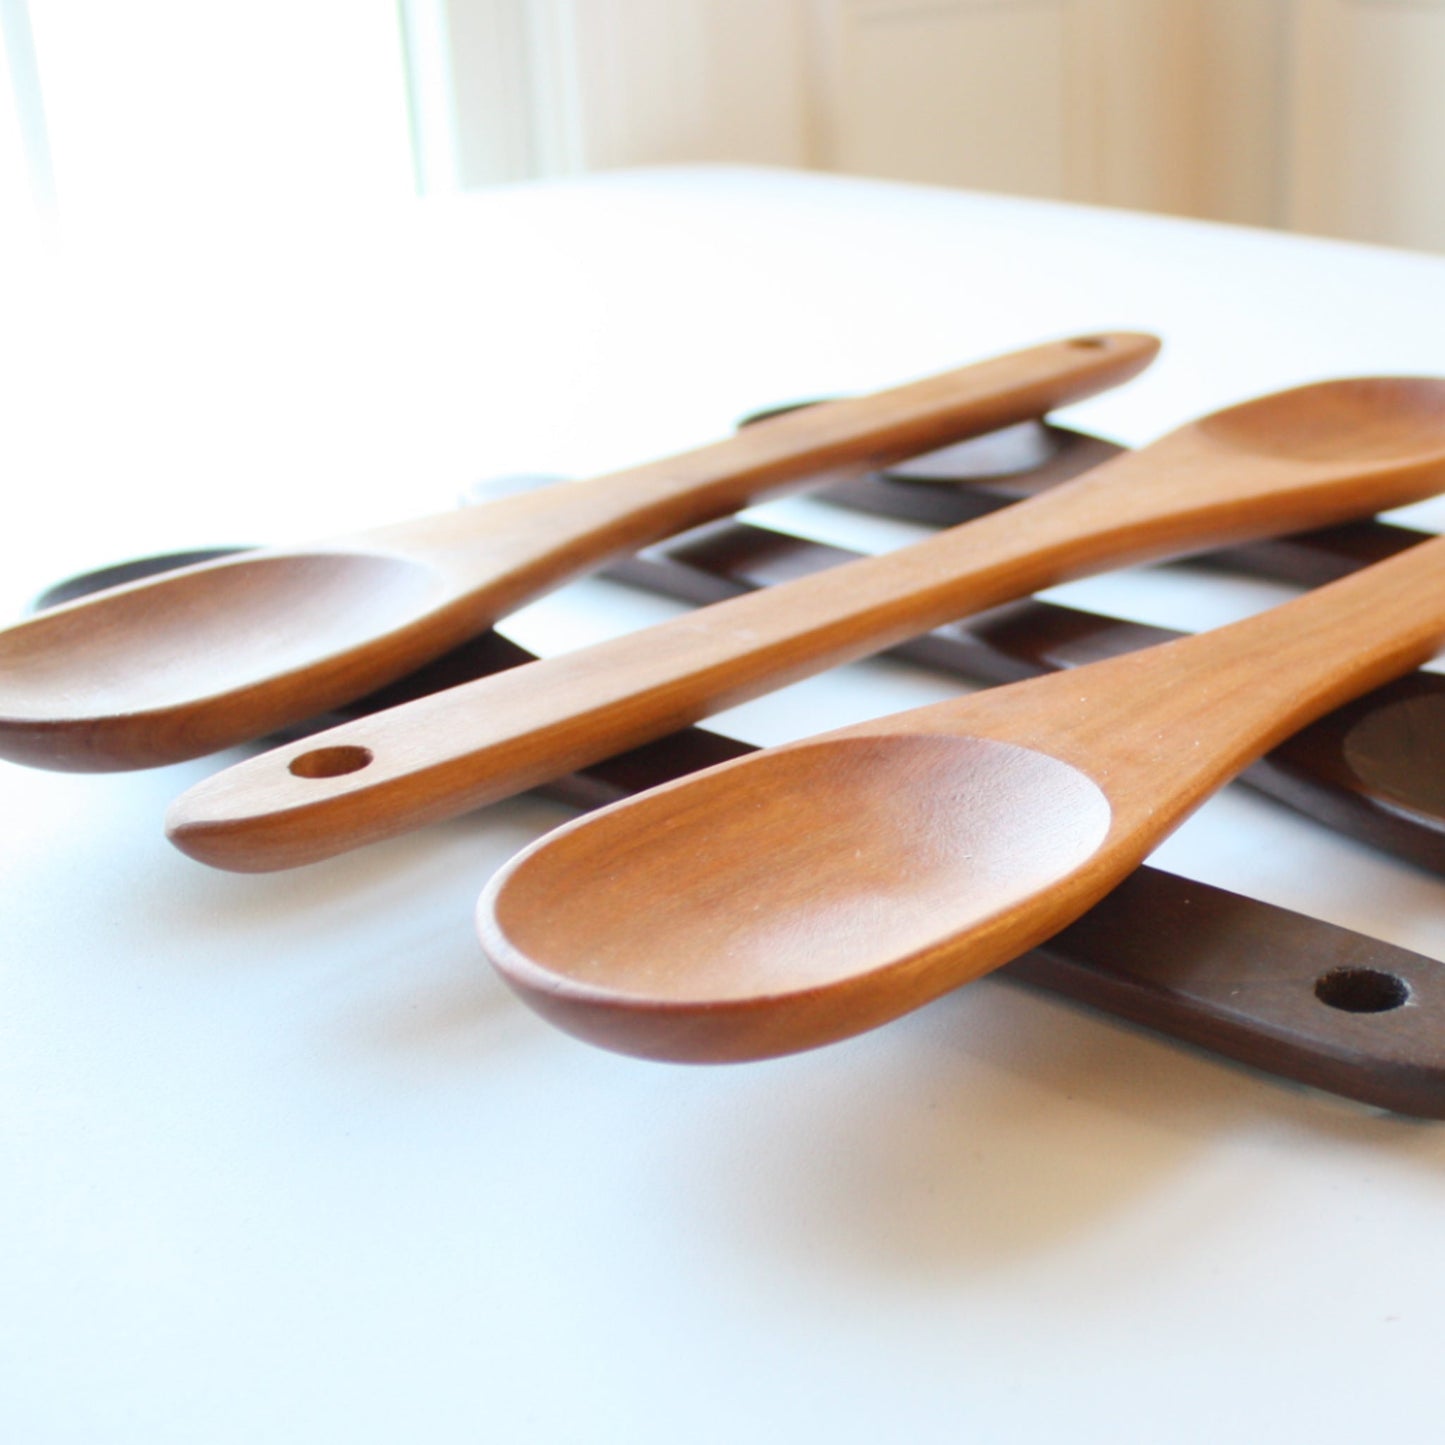 Handmade Everyday Wooden Spoon - Made in the USA